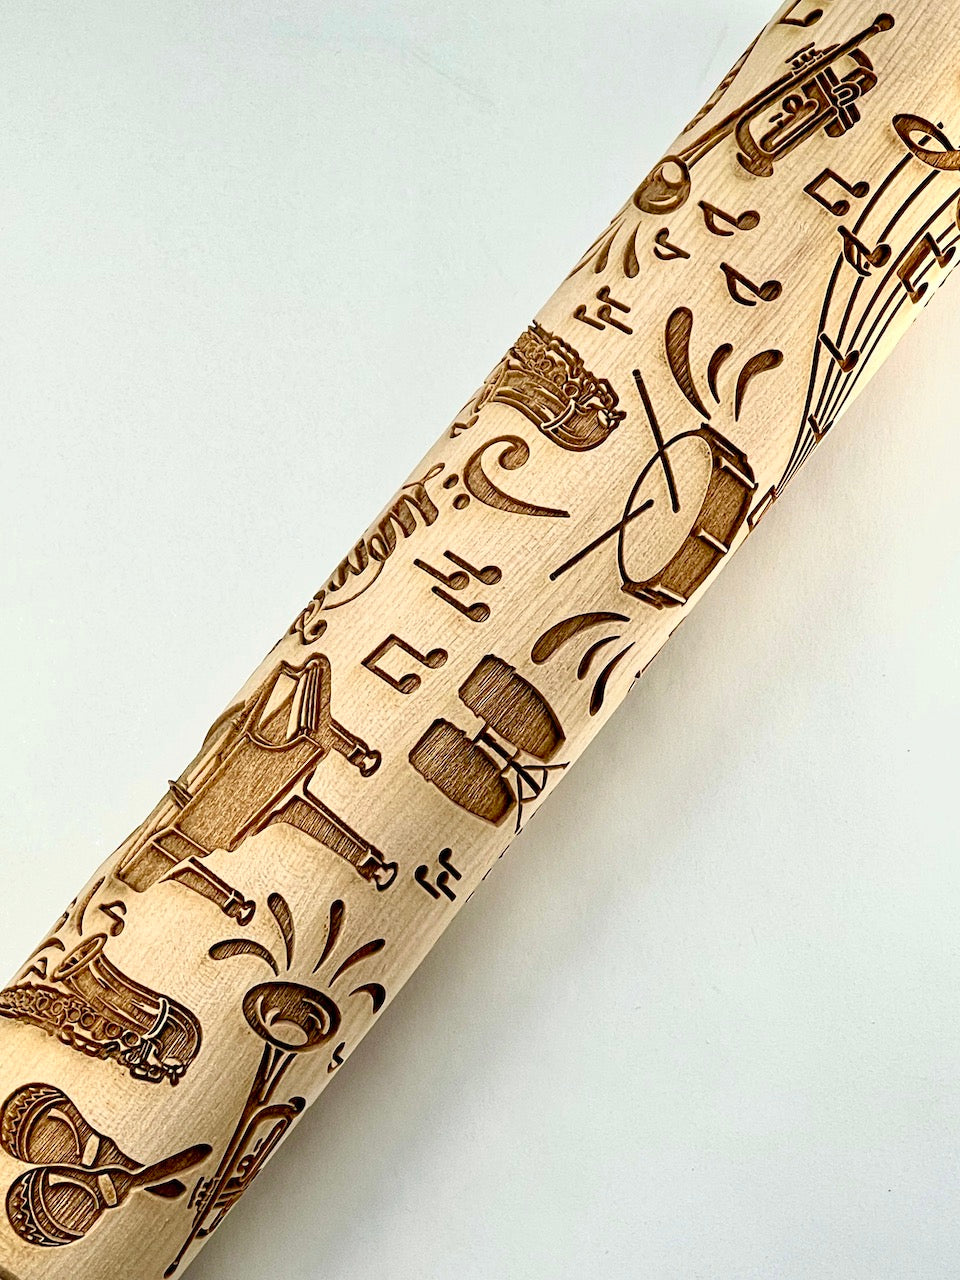 Sounds of Music Textured Rolling Pin